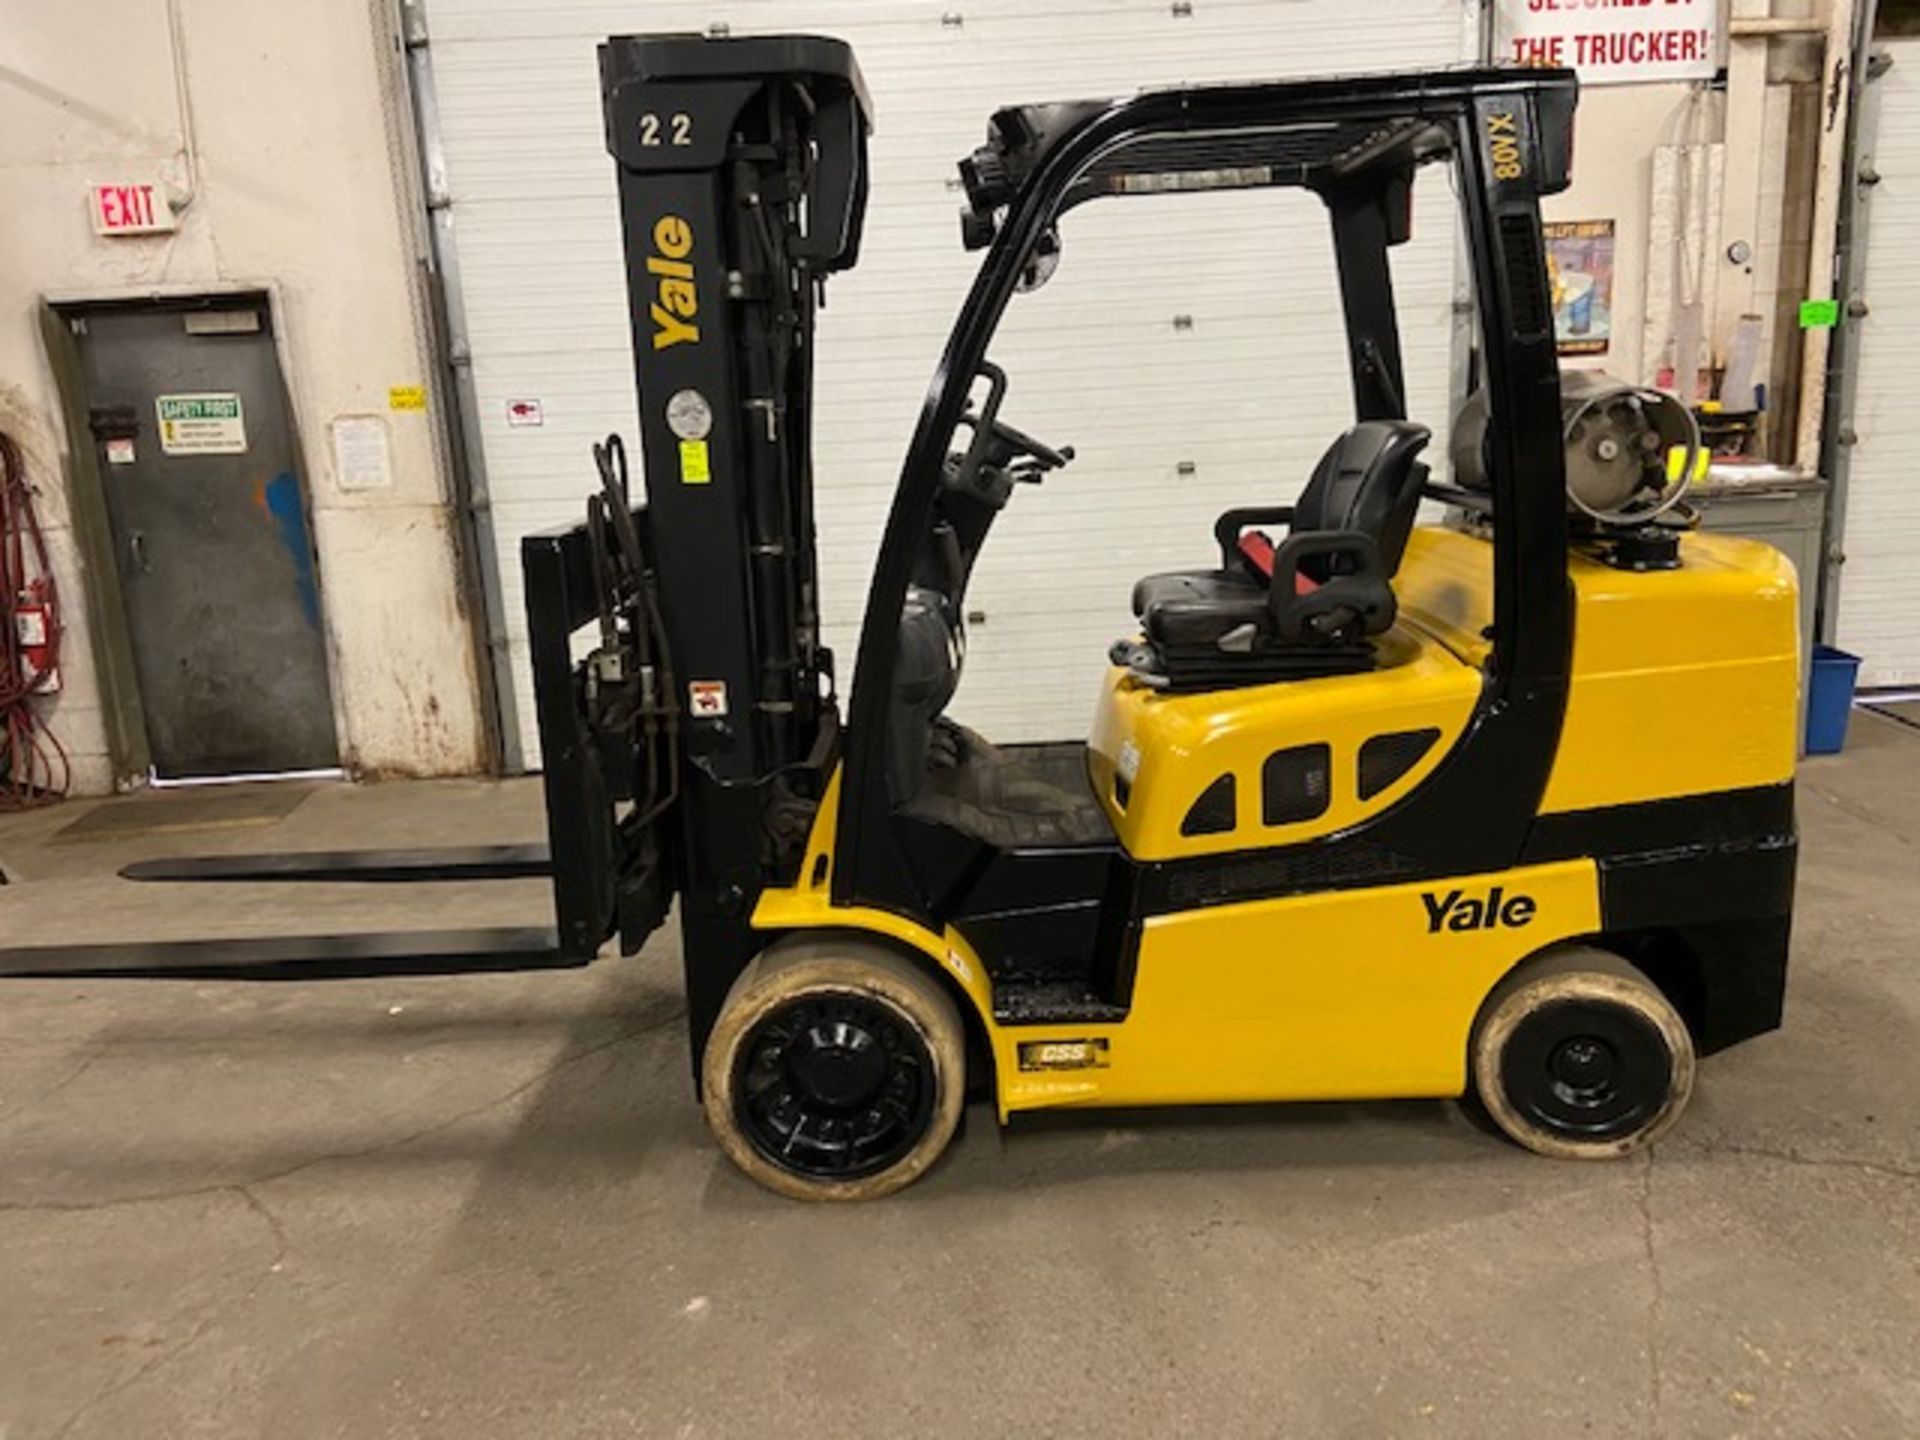 FREE CUSTOMS - 2017 Yale 8000lbs Capacity Forklift with 3-stage mast - LPG (propane) with